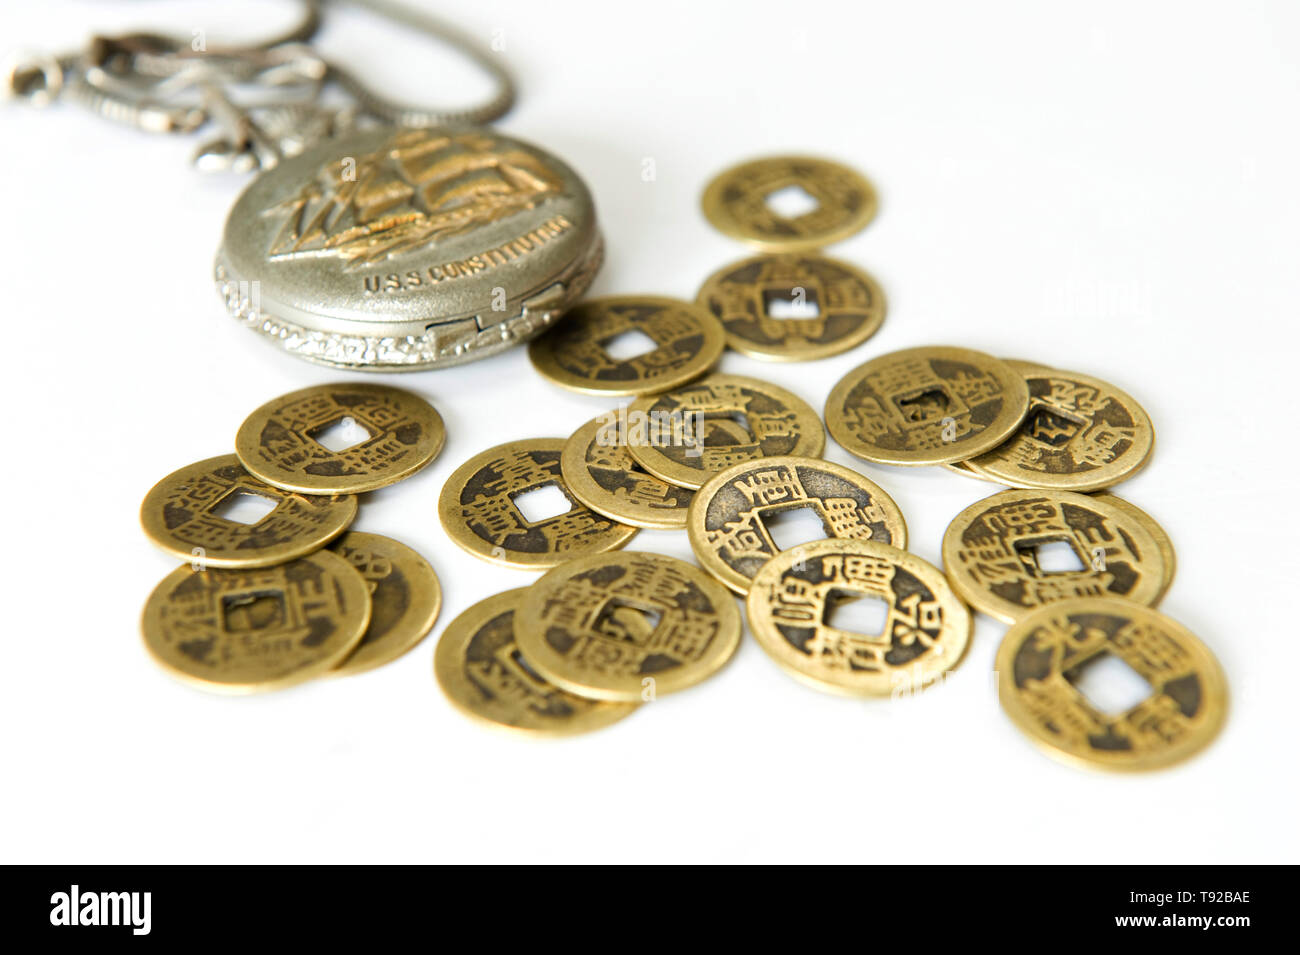 Pocket watch and ancient Chinese coins Stock Photo